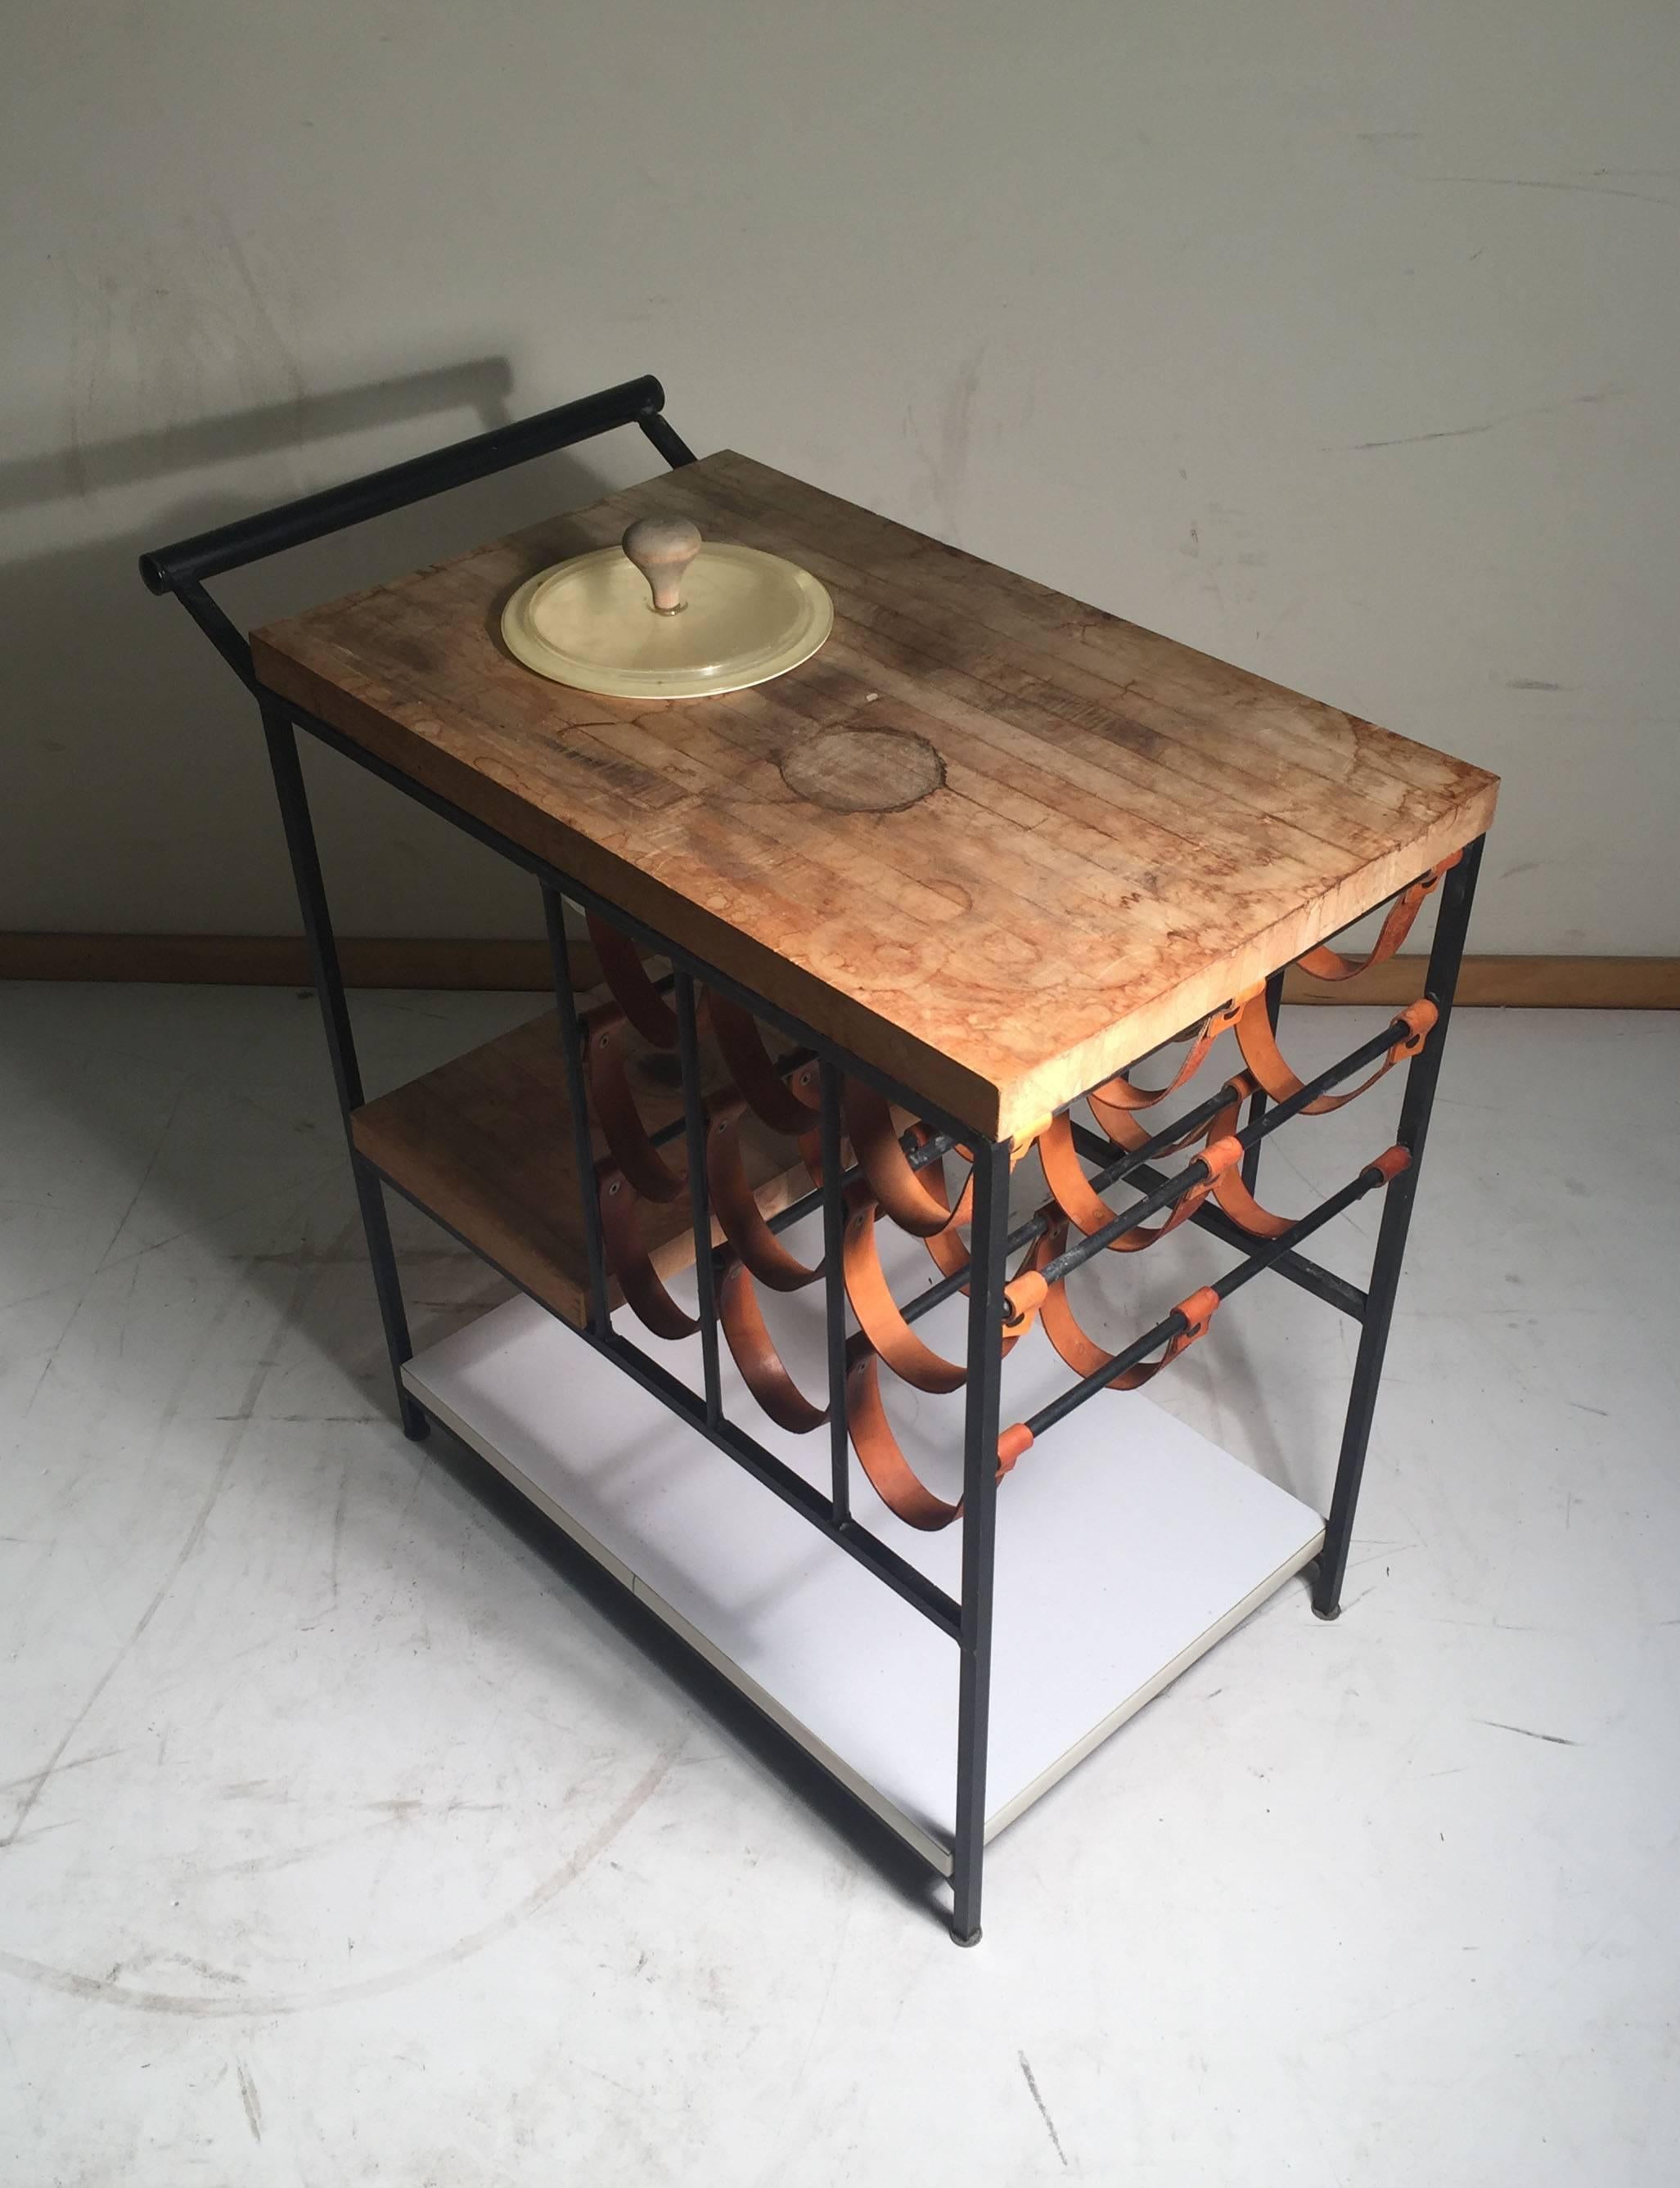 Beautiful example of Arthur Umanoff's bar cart with leather strap wine rack. 

Butcher blocks need to be sanded down. Cart includes the original castor wheels, but one of the castors is bent and needs to be restored if the intent is to use the